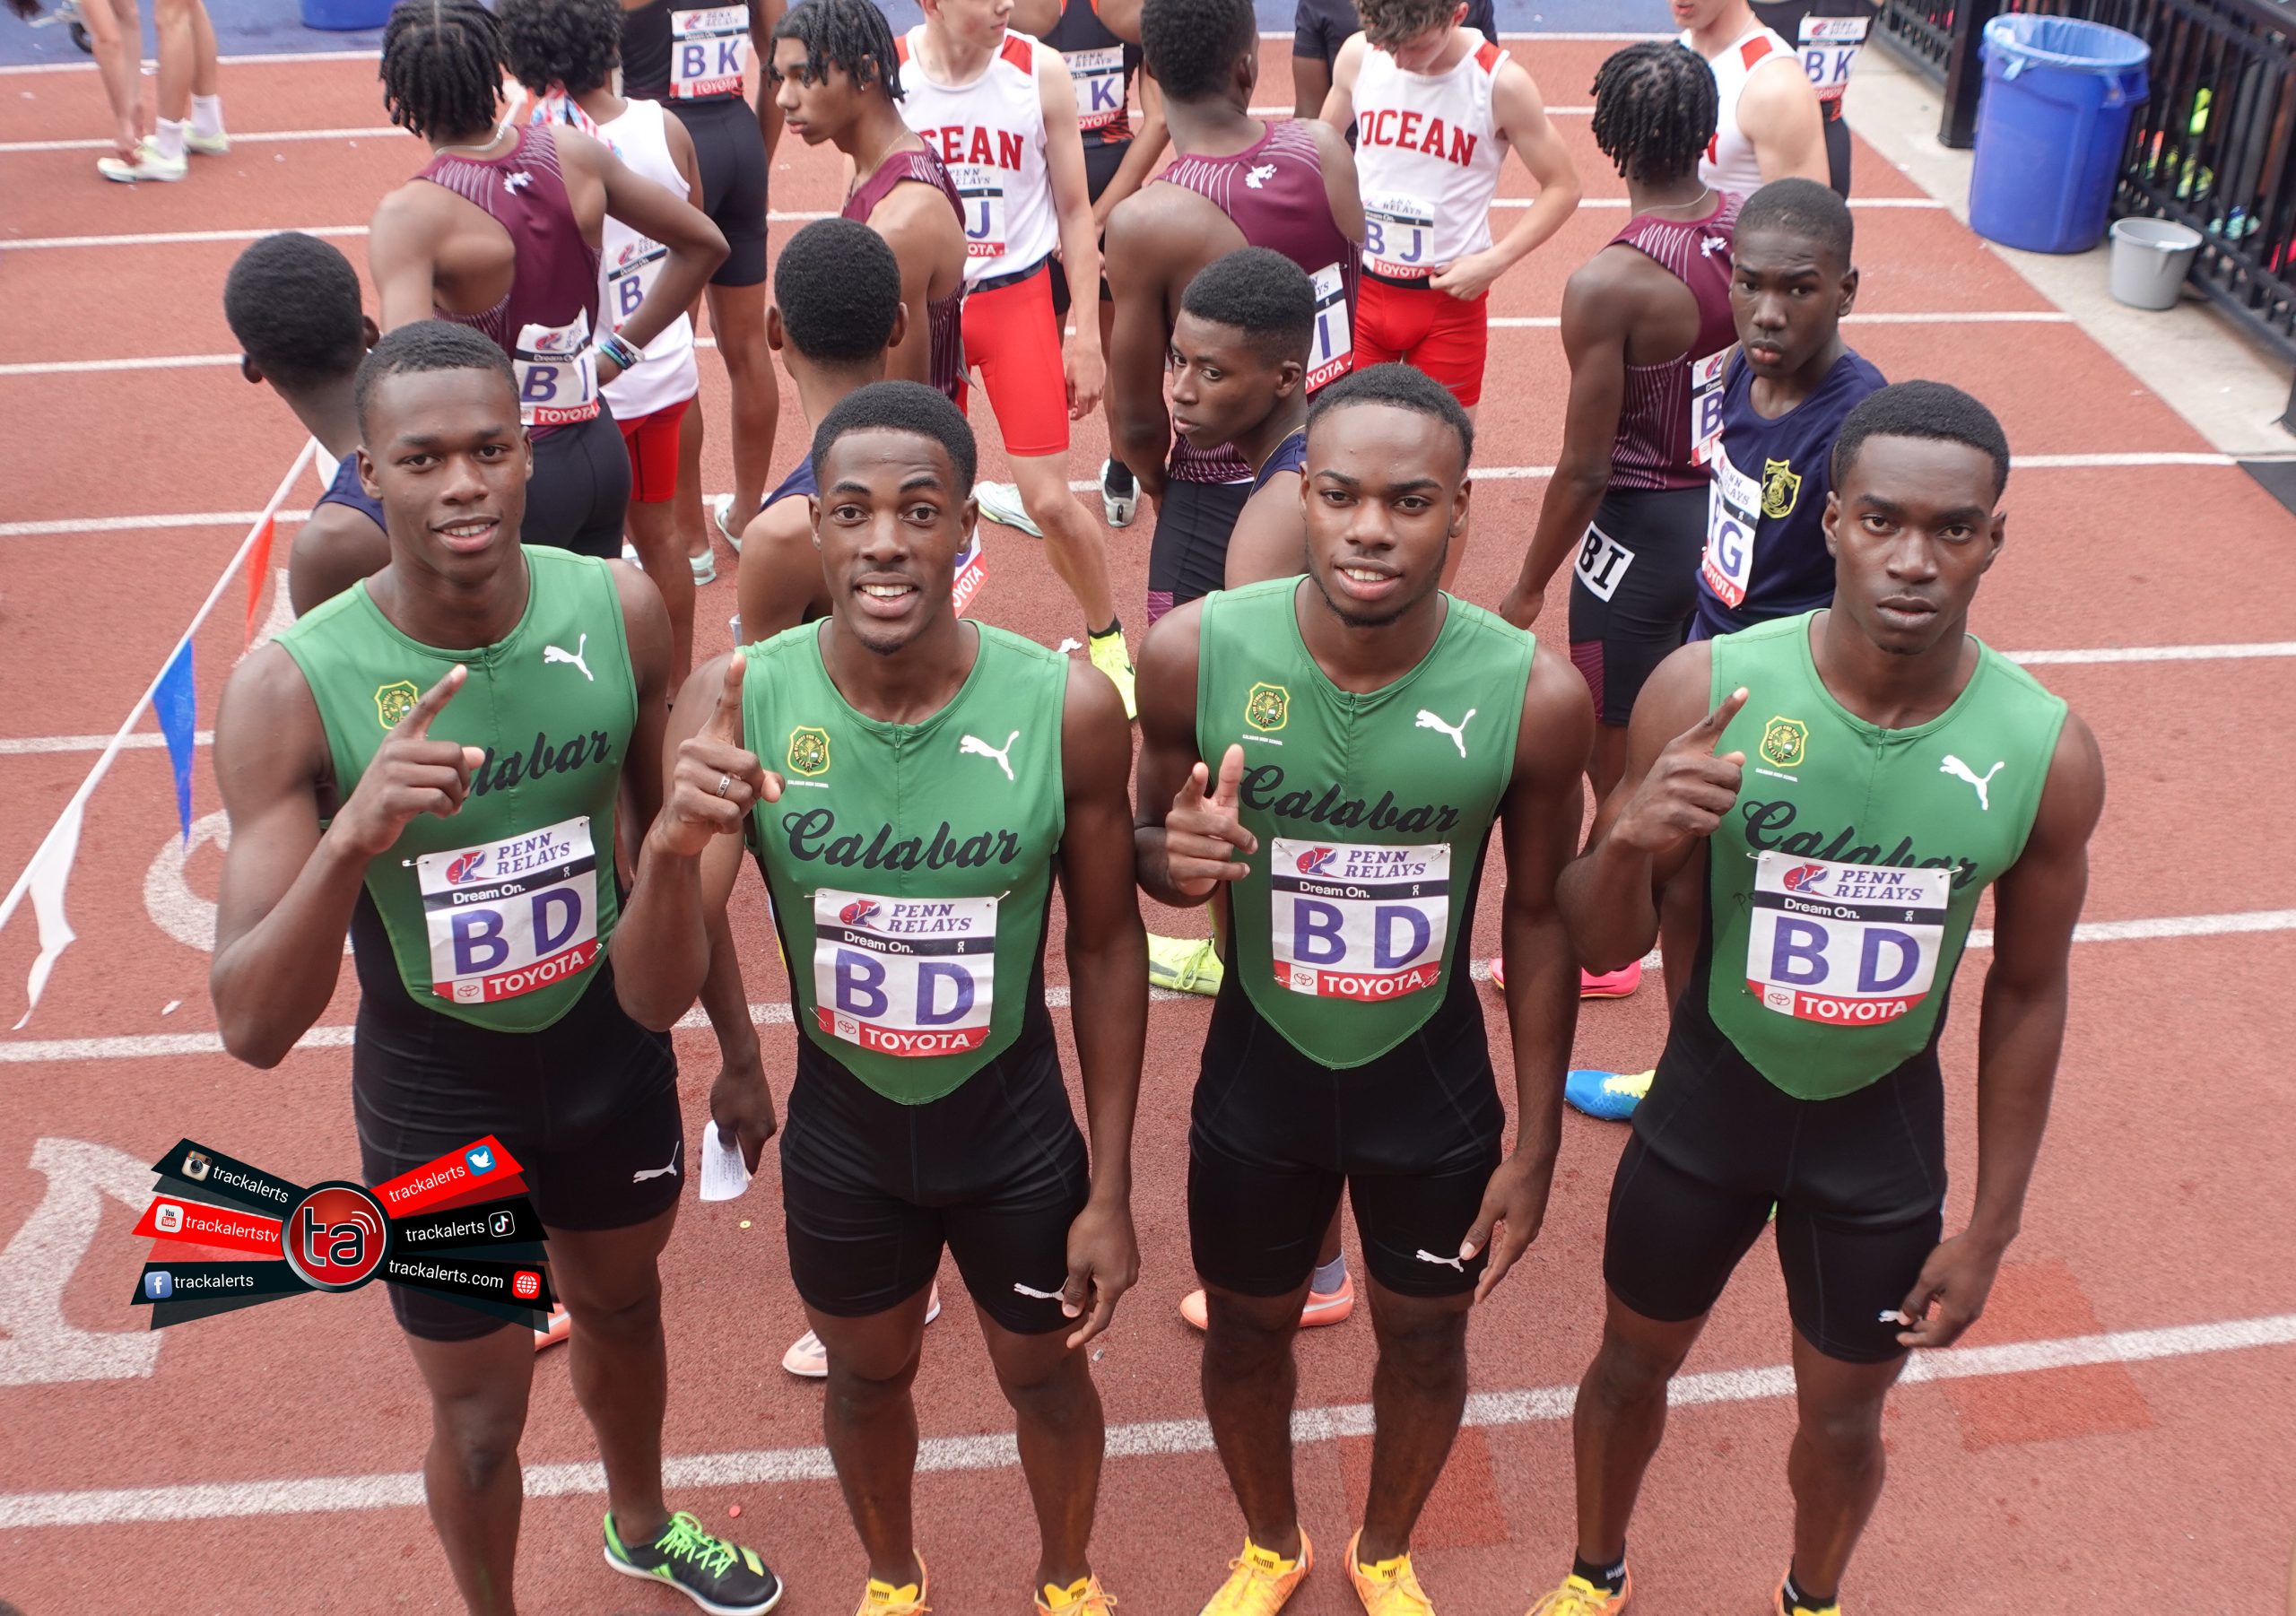 Calabar sets the pace and qualifies for the High School Boys' 4x400 Championship of America at Penn Relays 2023! 🏃‍♂️🏆 #trackandfield #pennrelays #highschoolsports #calabar"